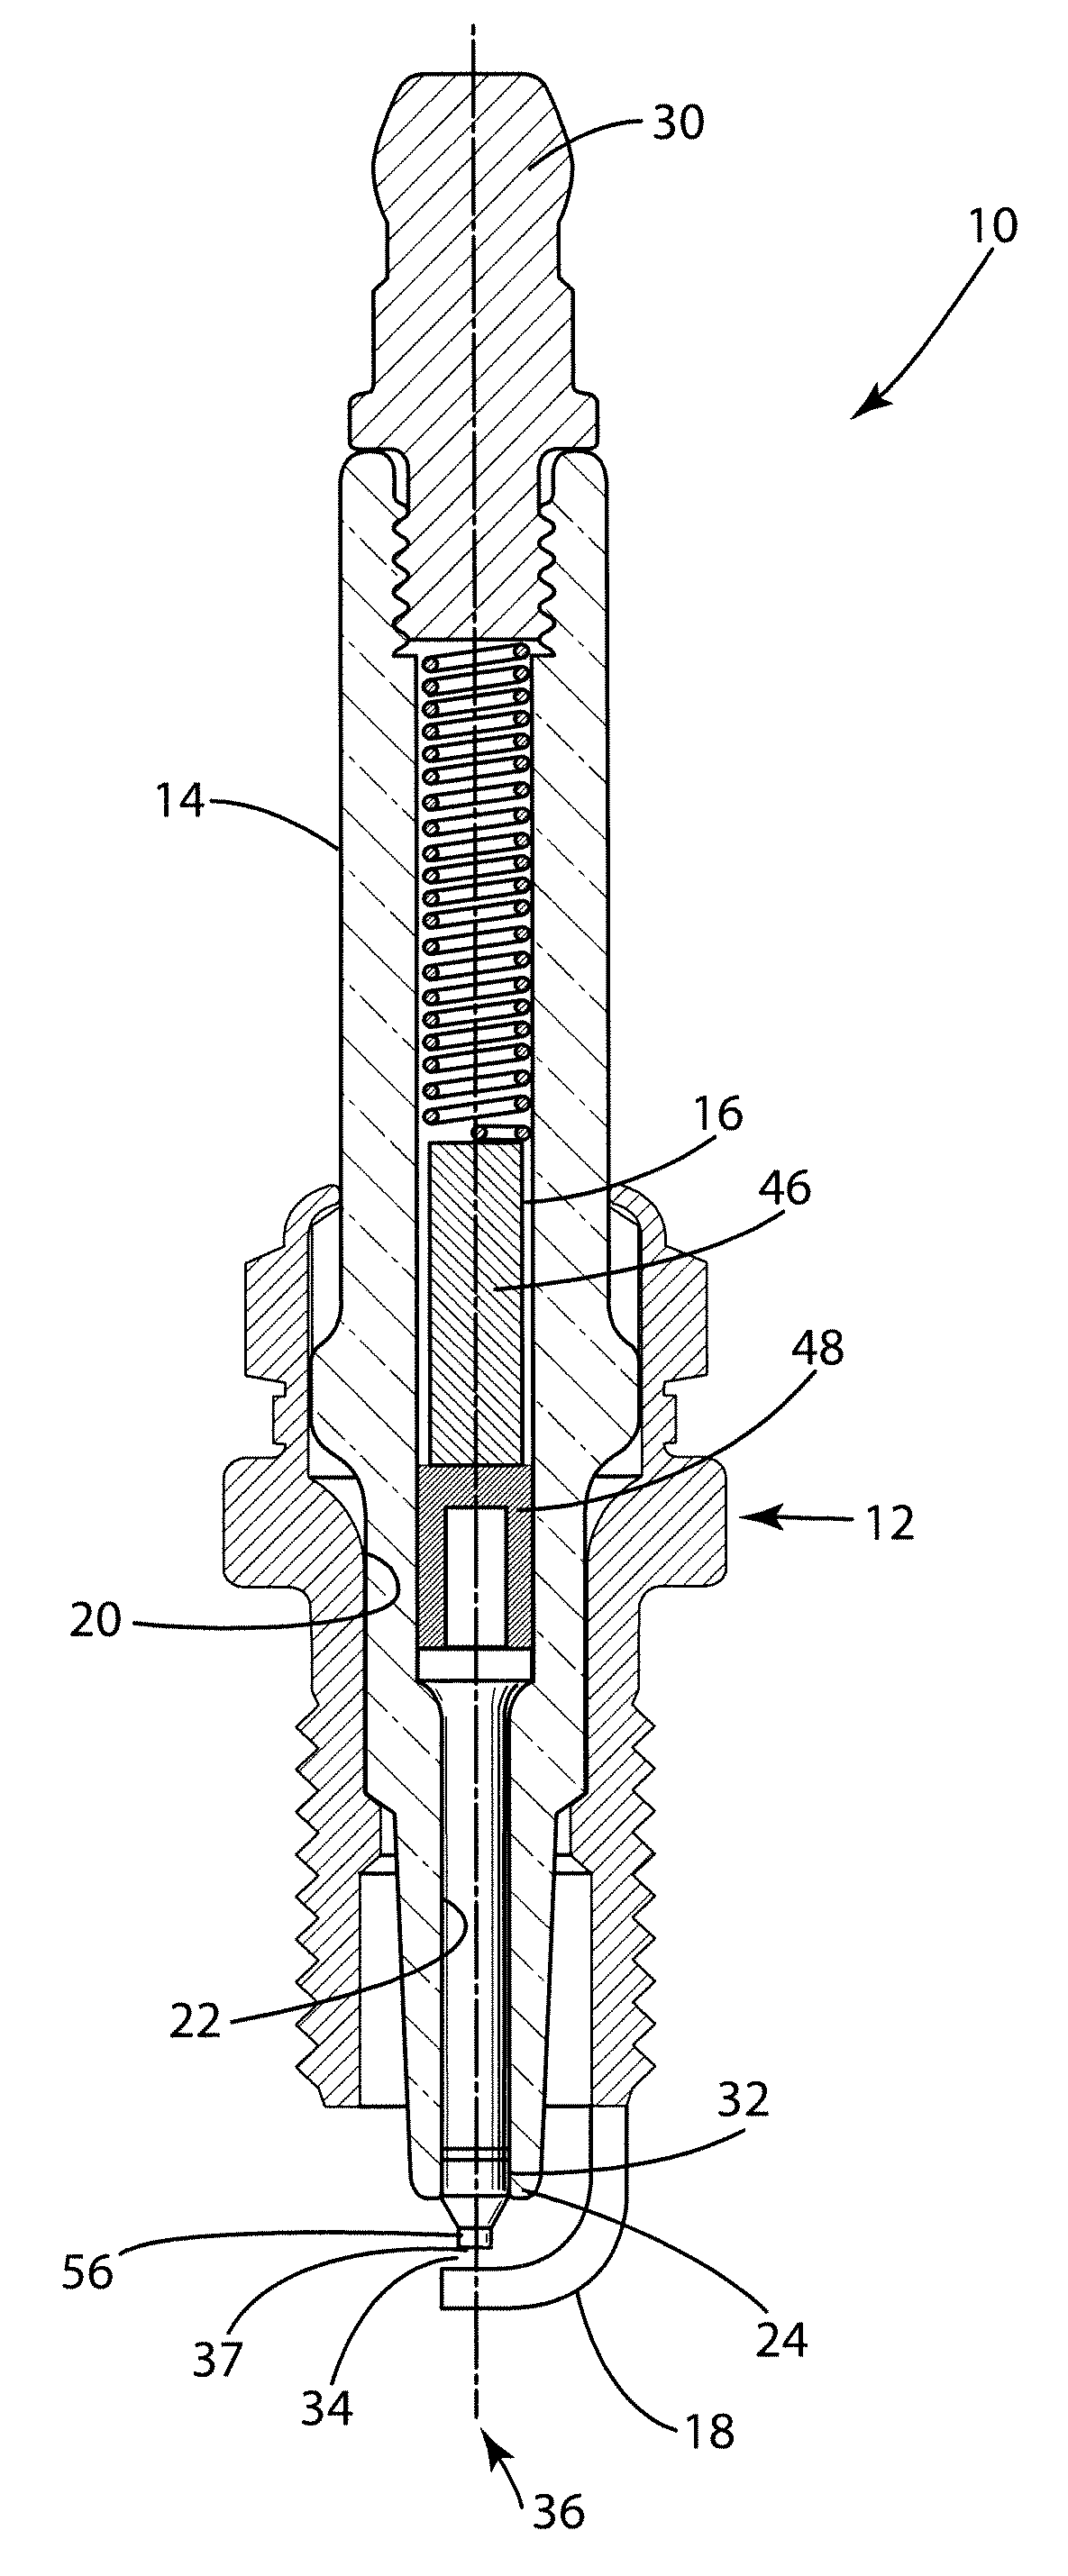 Ceramic with improved high temperature electrical properties for use as a spark plug insulator